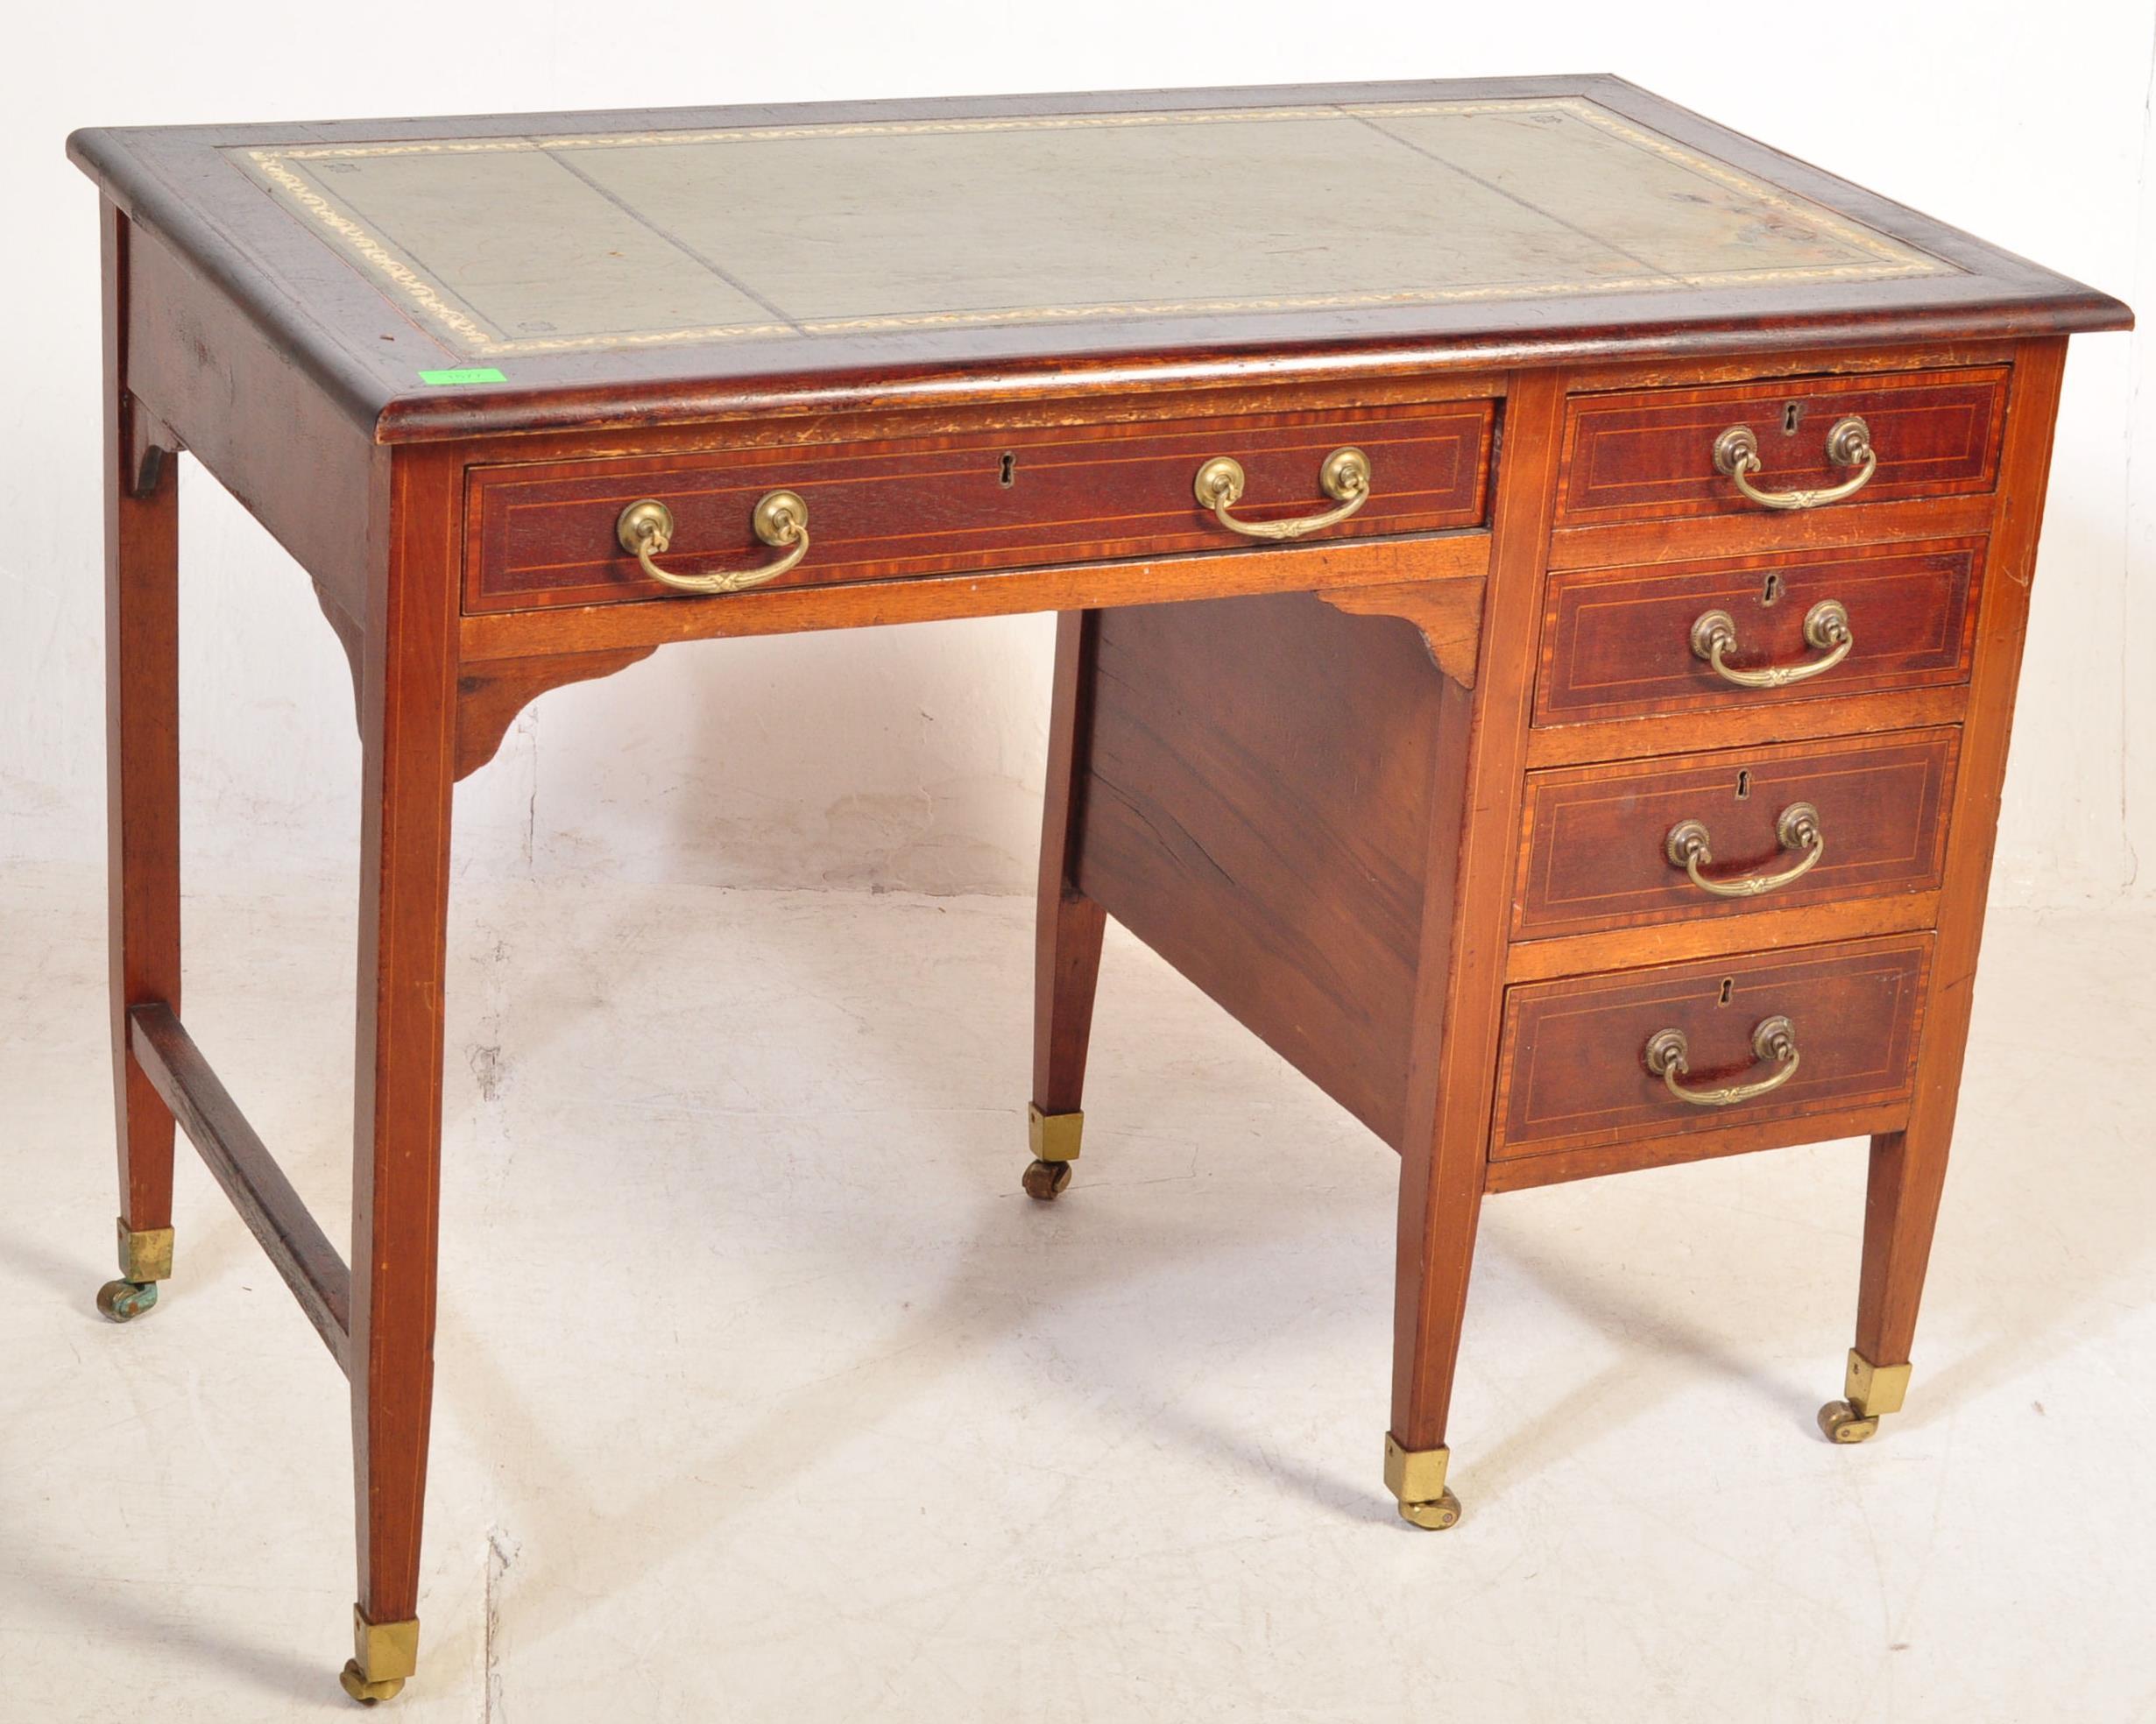 AN EDWARDIAN MAHOGANY LEATHER TOP WRITING DESK/TABLE - Image 2 of 7